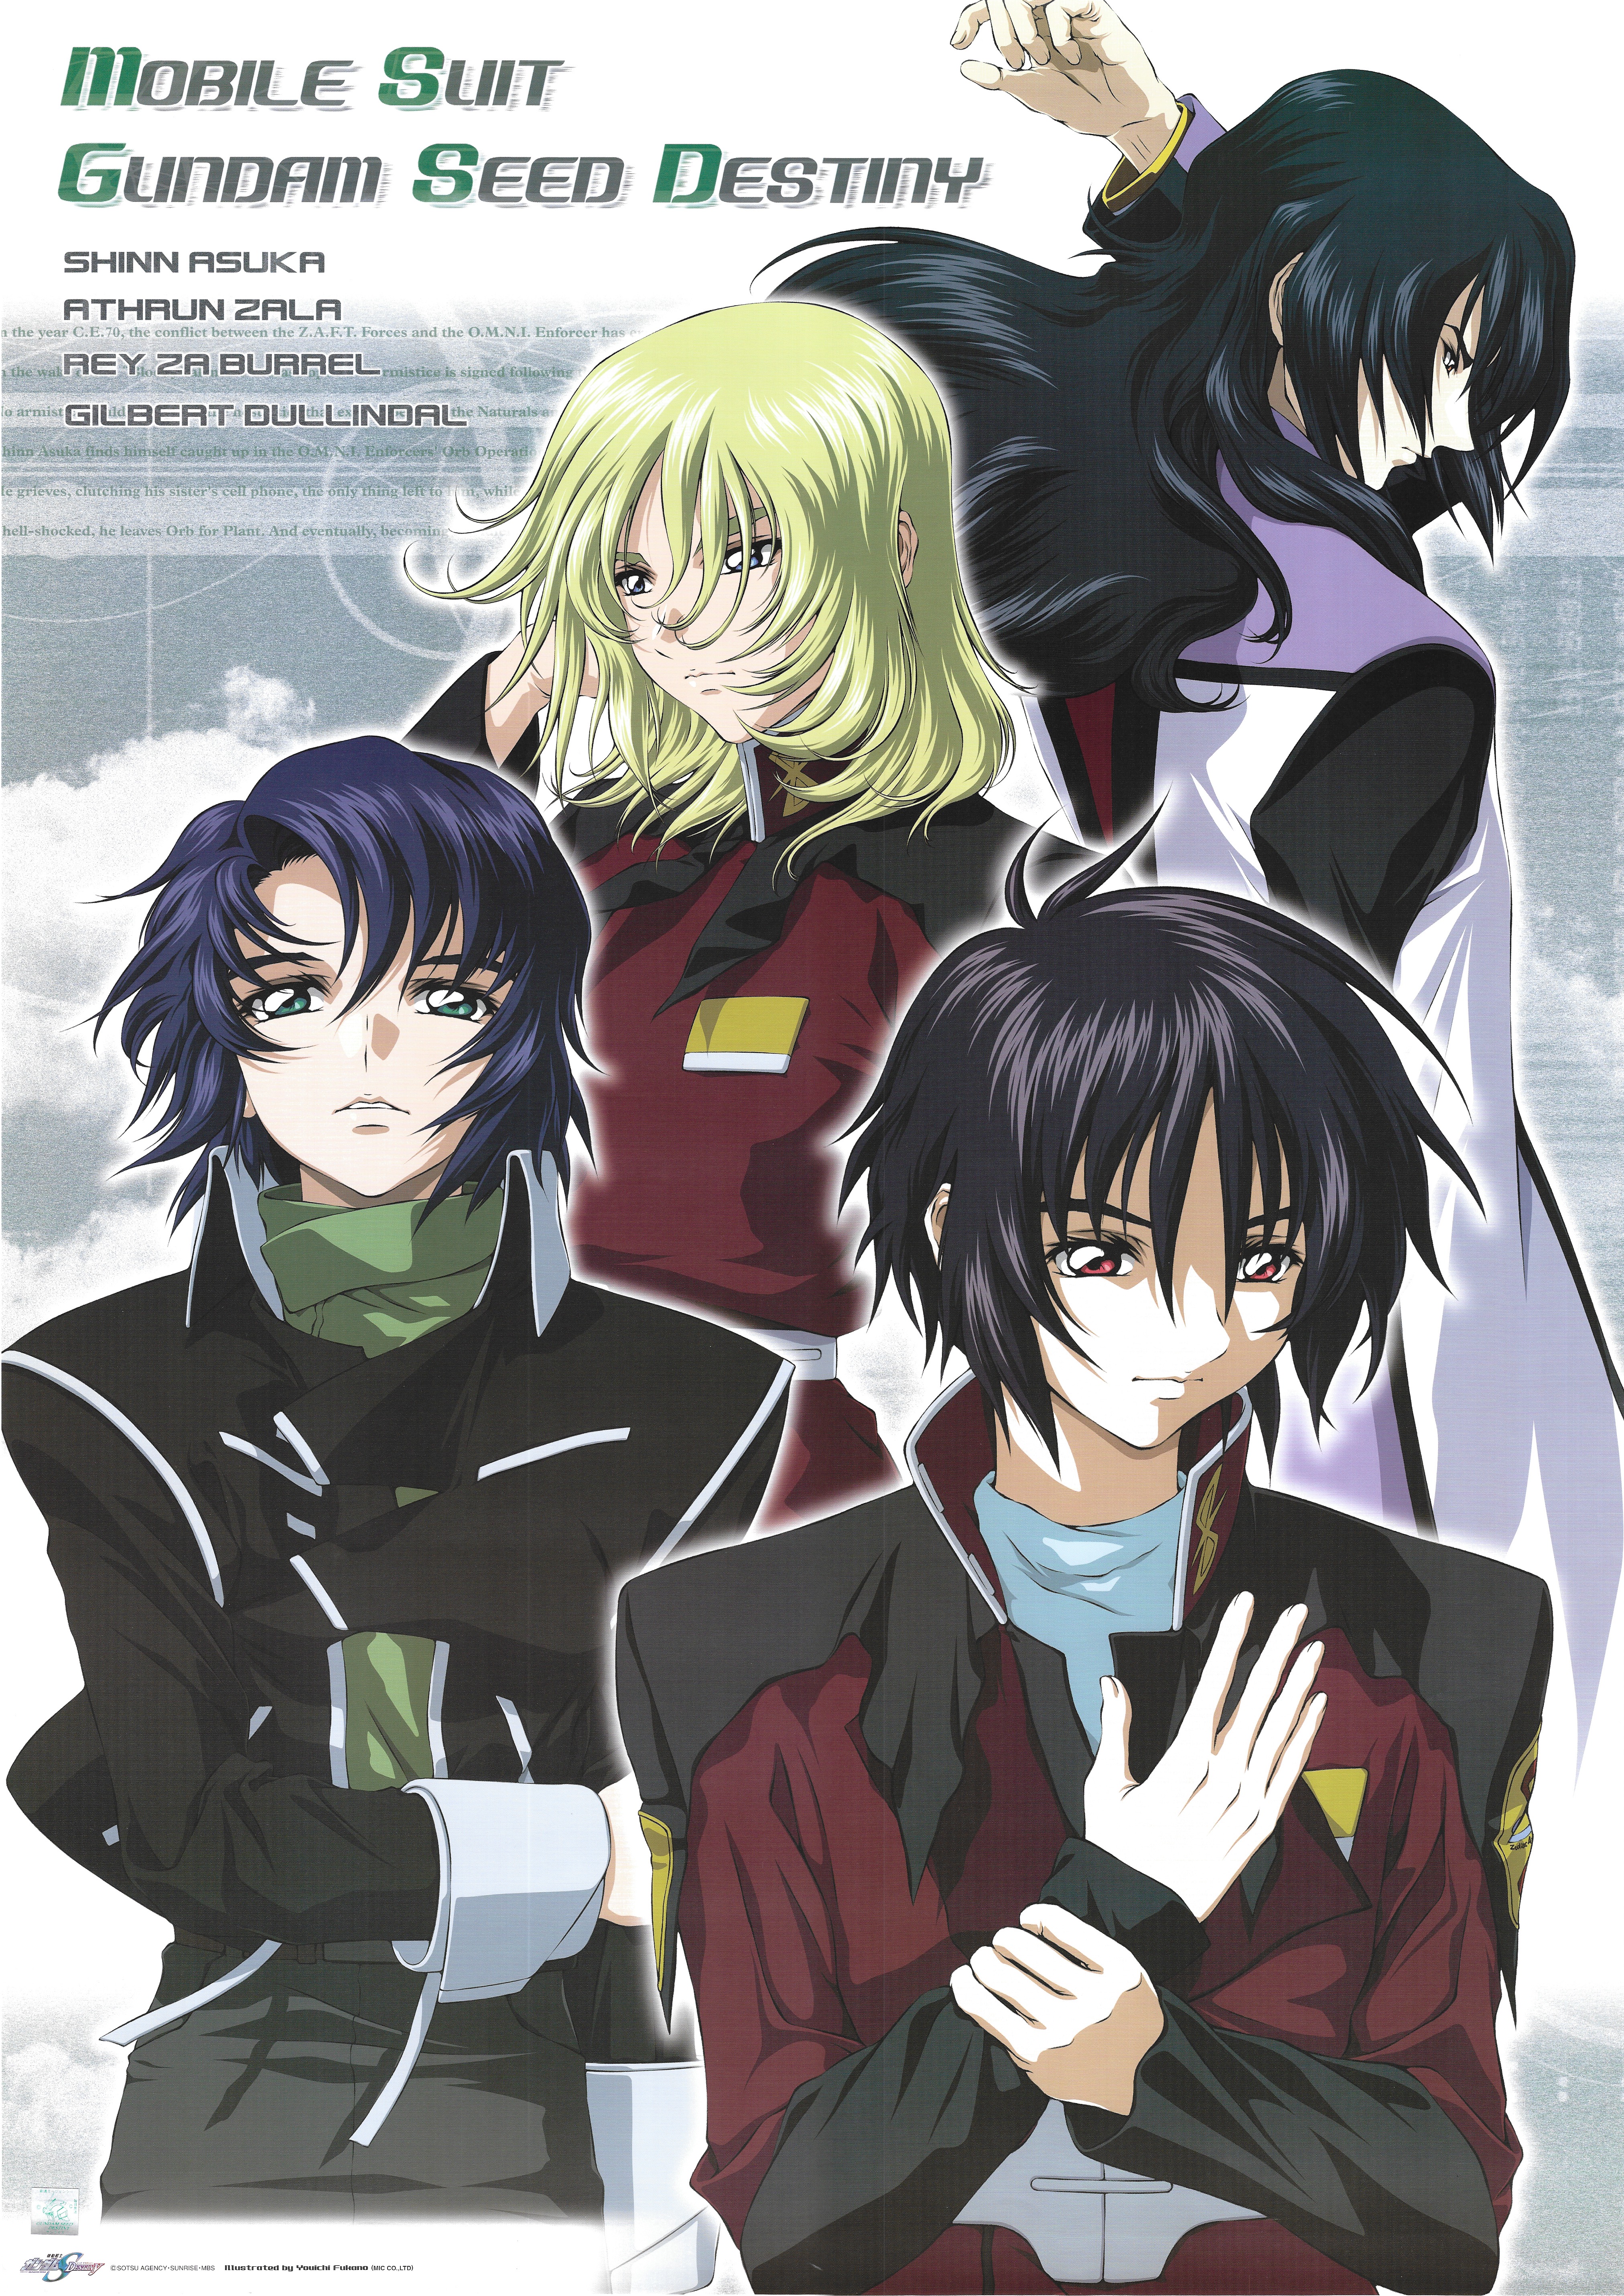 Mobile Suit Gundam Seed Destinies B2 Poster for Sales